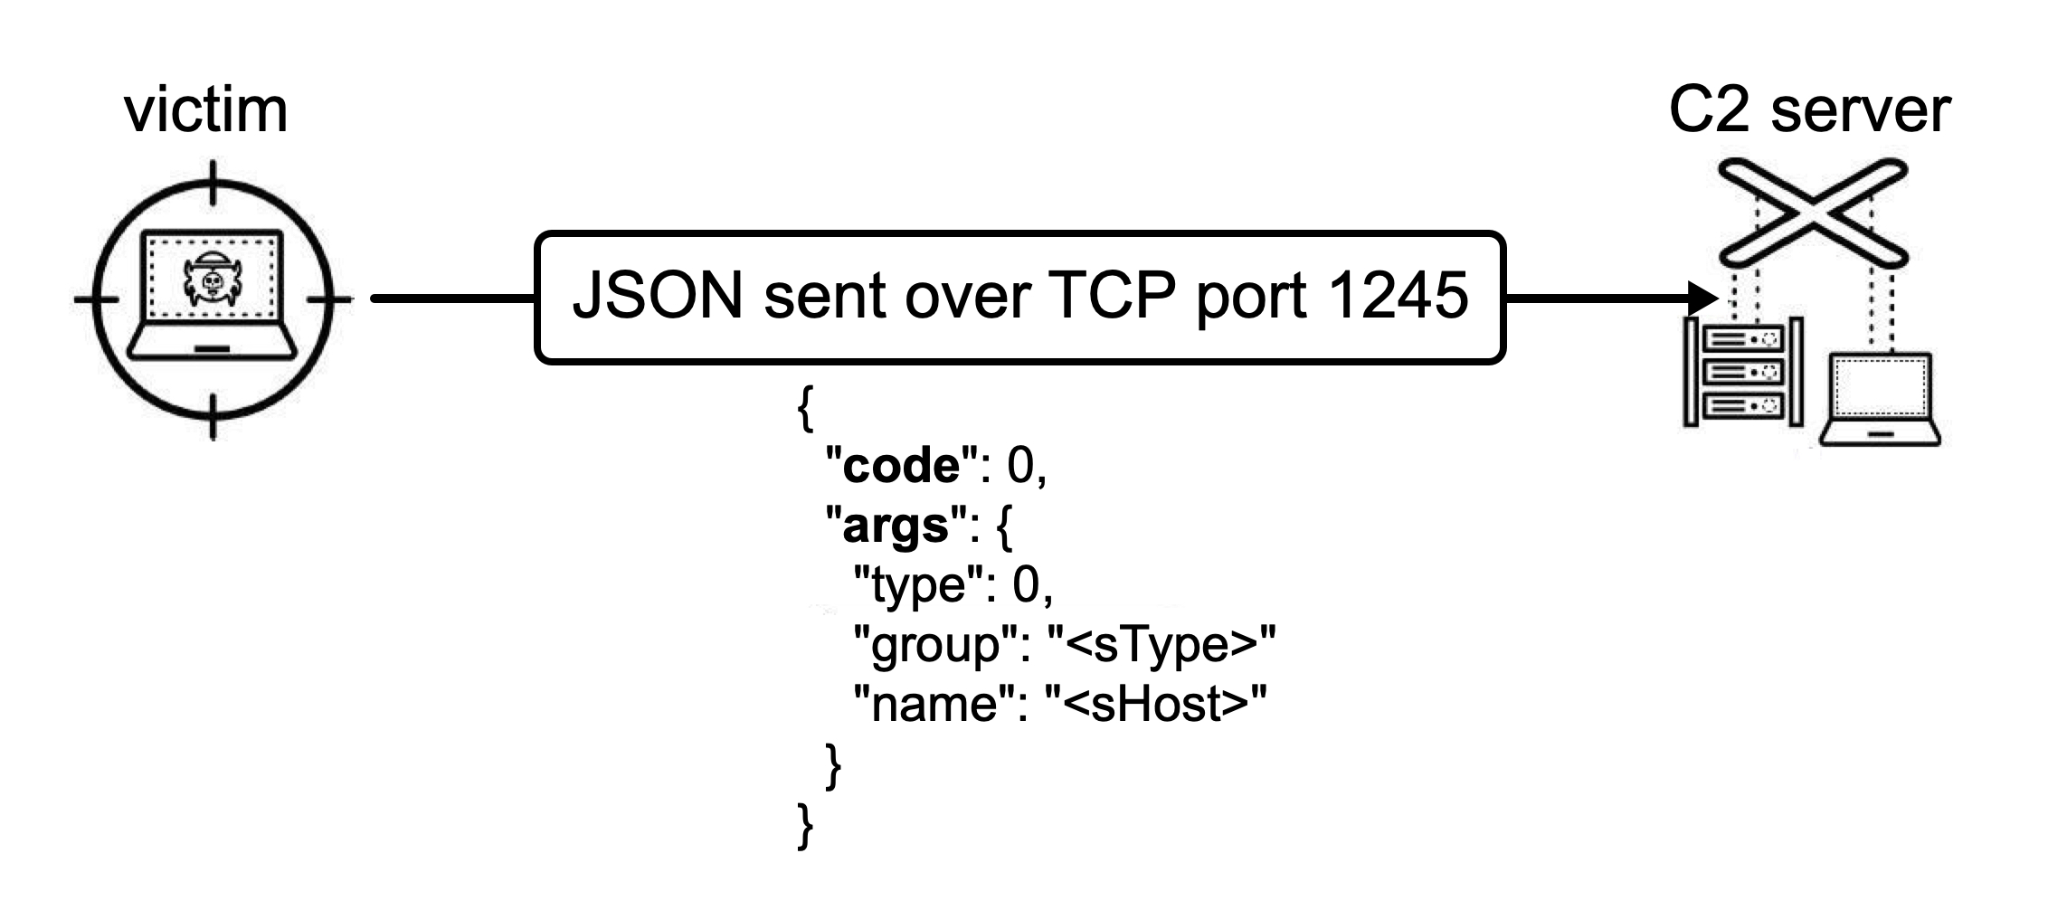 Image 7 is a diagram of the heartbeat command and control message. Victim symbolized by icon of bugged laptop within target. JSON sent over TCP port 1245. Arrow pointing to command and control server symbolized by icon of server and laptop on puppet strings. Below the JSON text is a code snippet. 